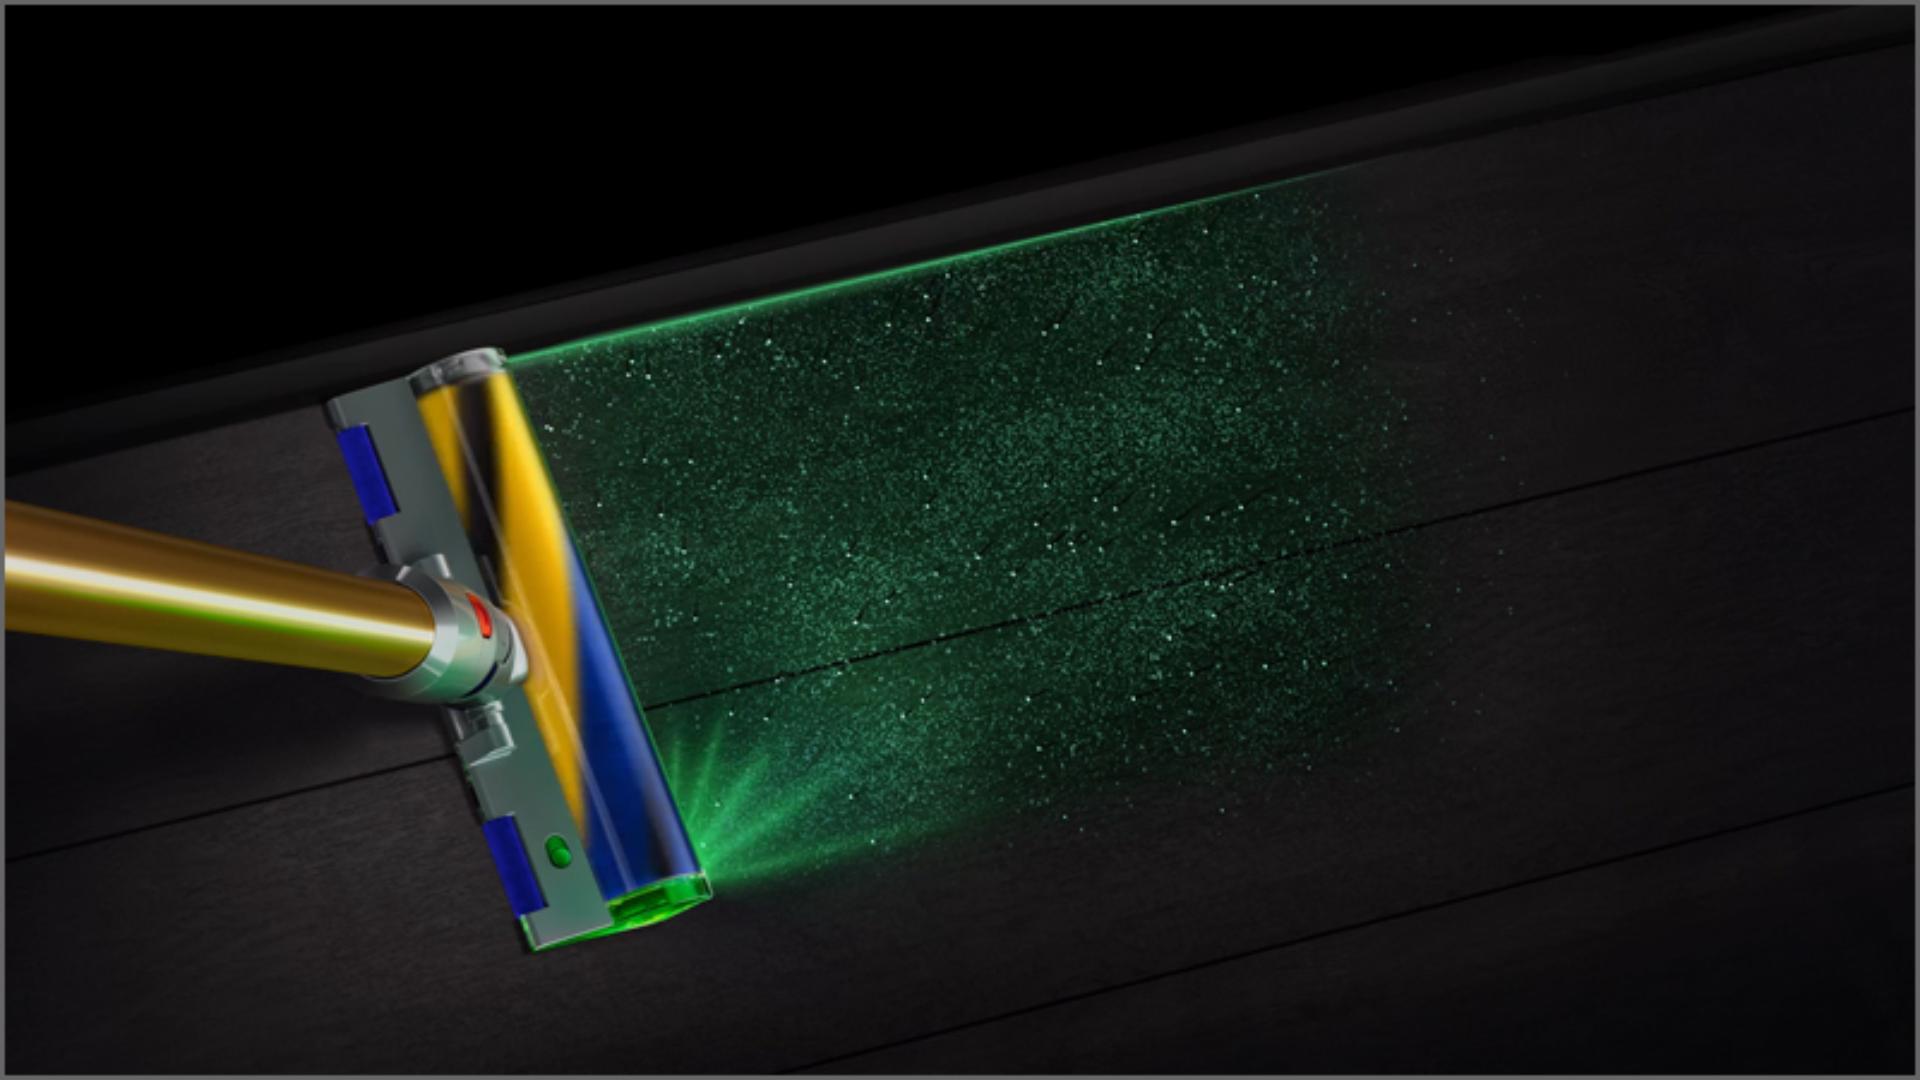 Laser detects the particles you can’t normally see